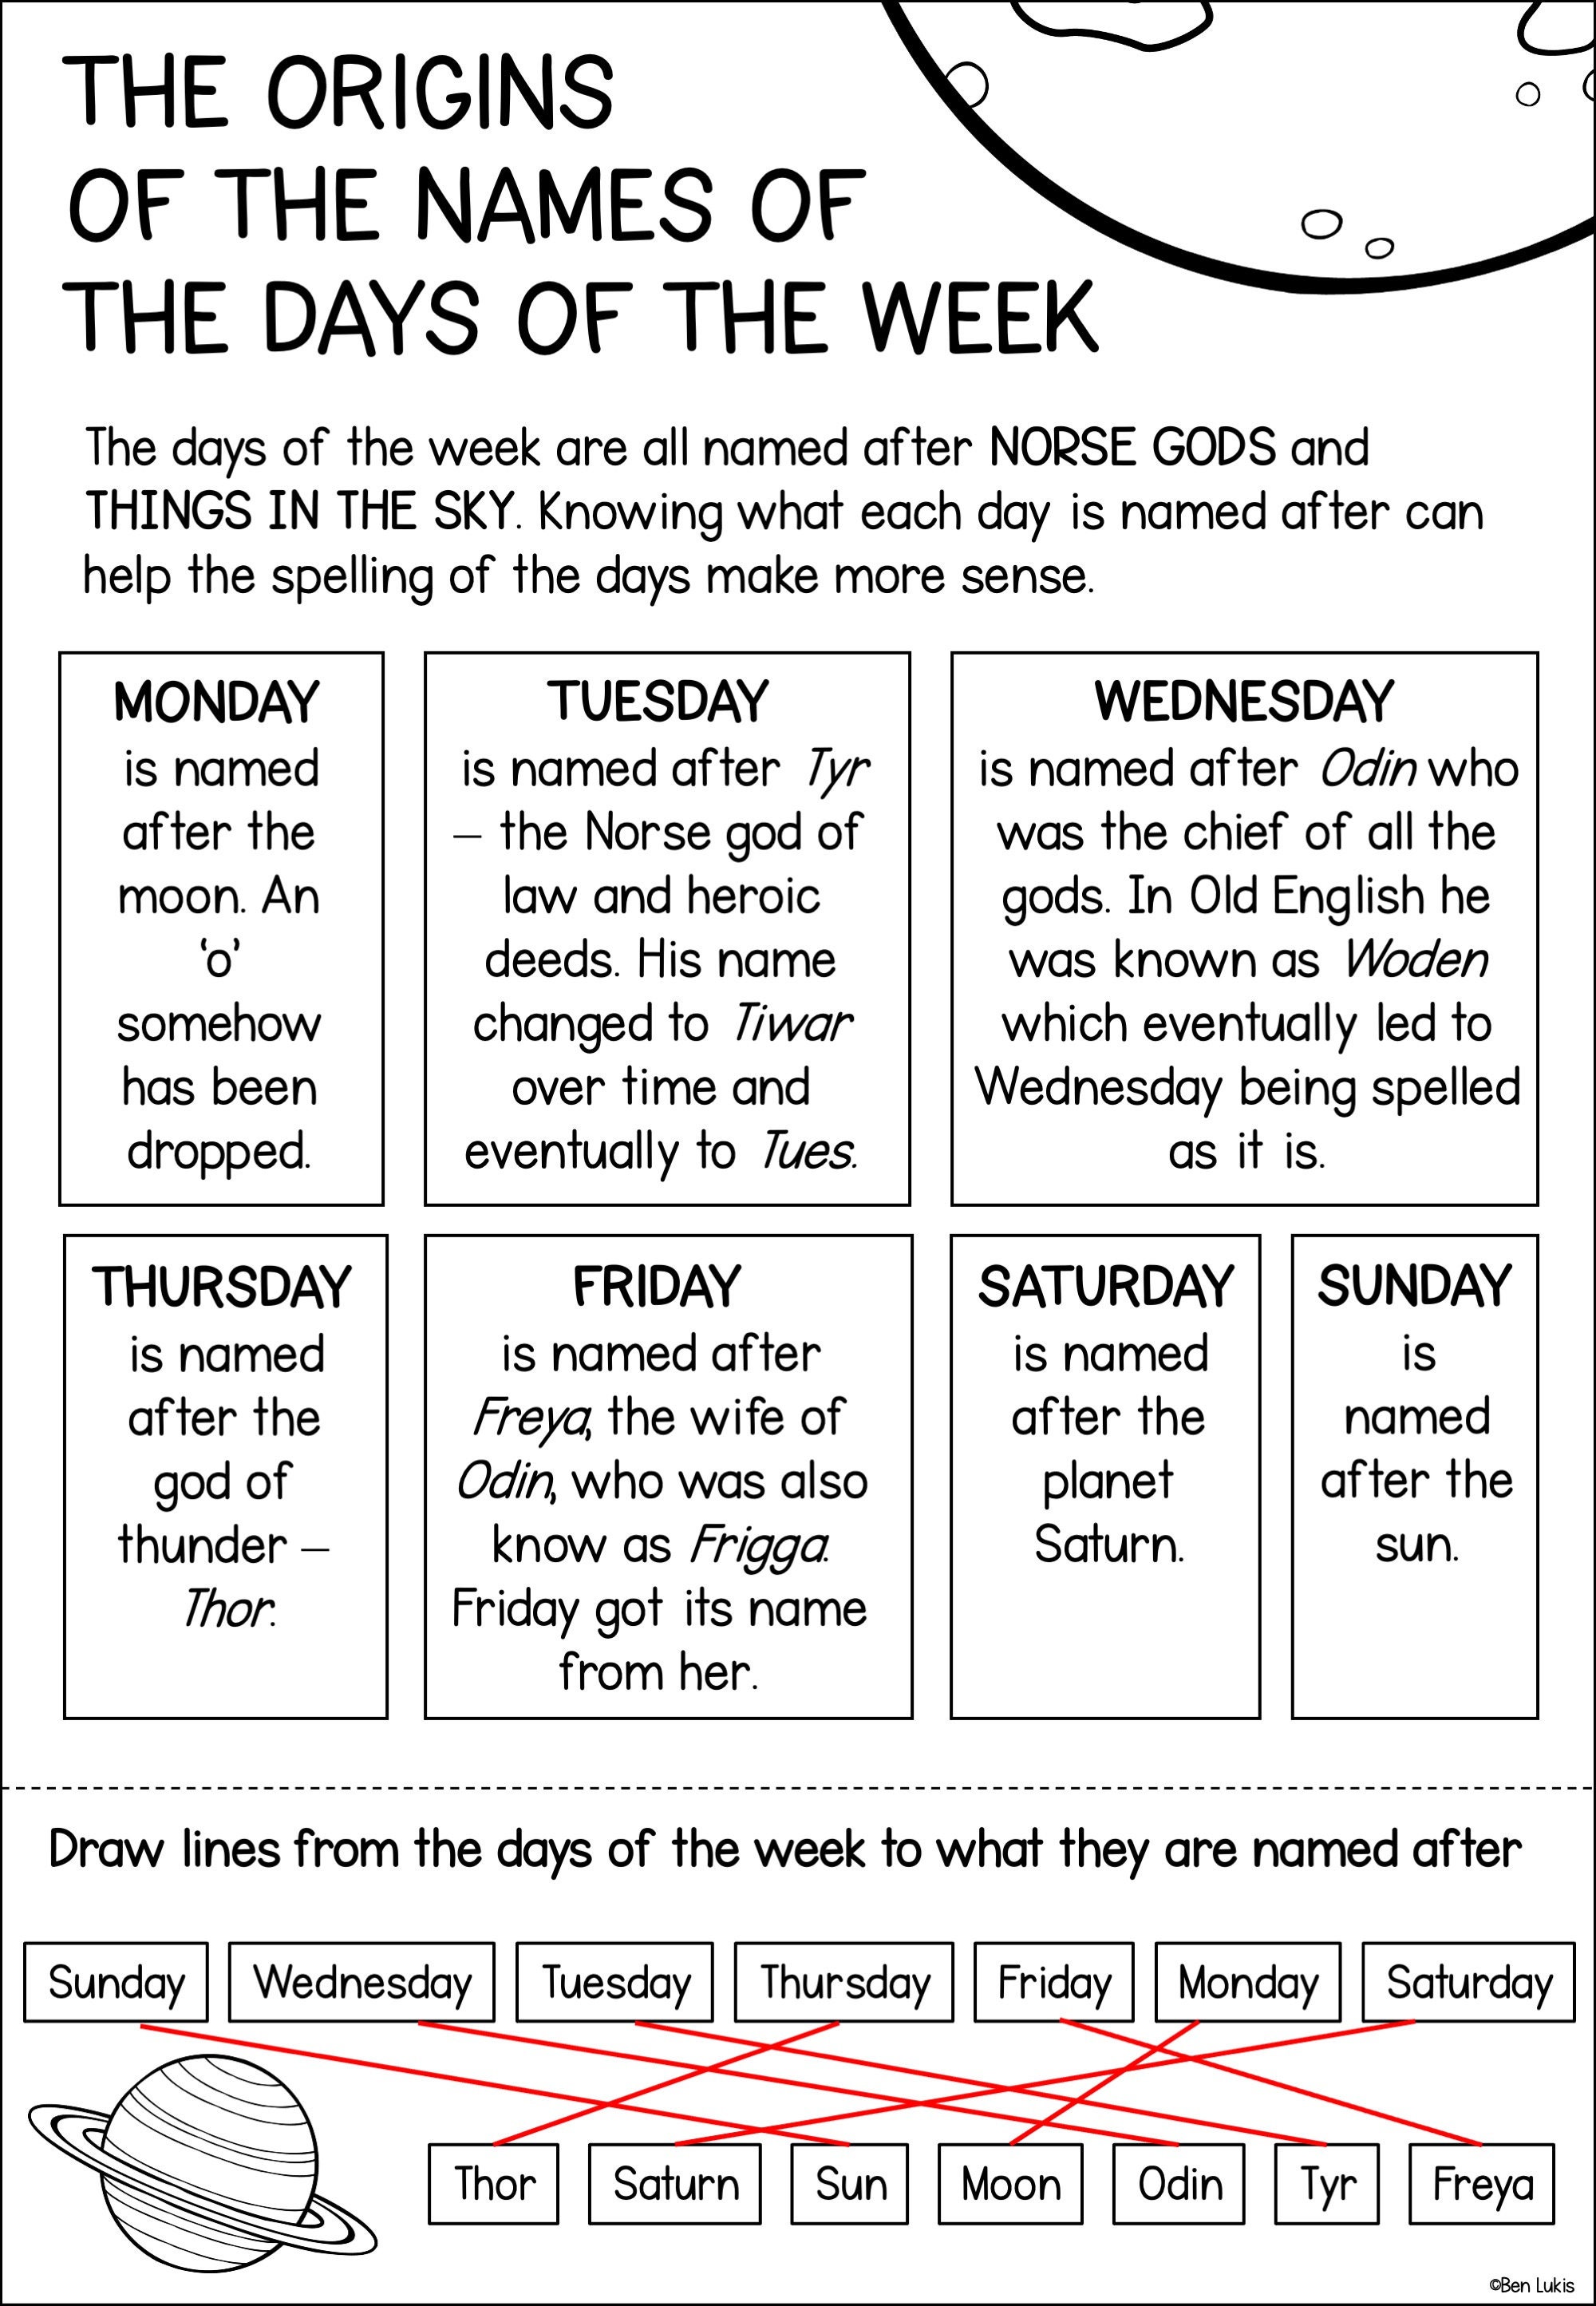 English Days of the Week: Origins, Expressions, Useful Vocabulary and More!